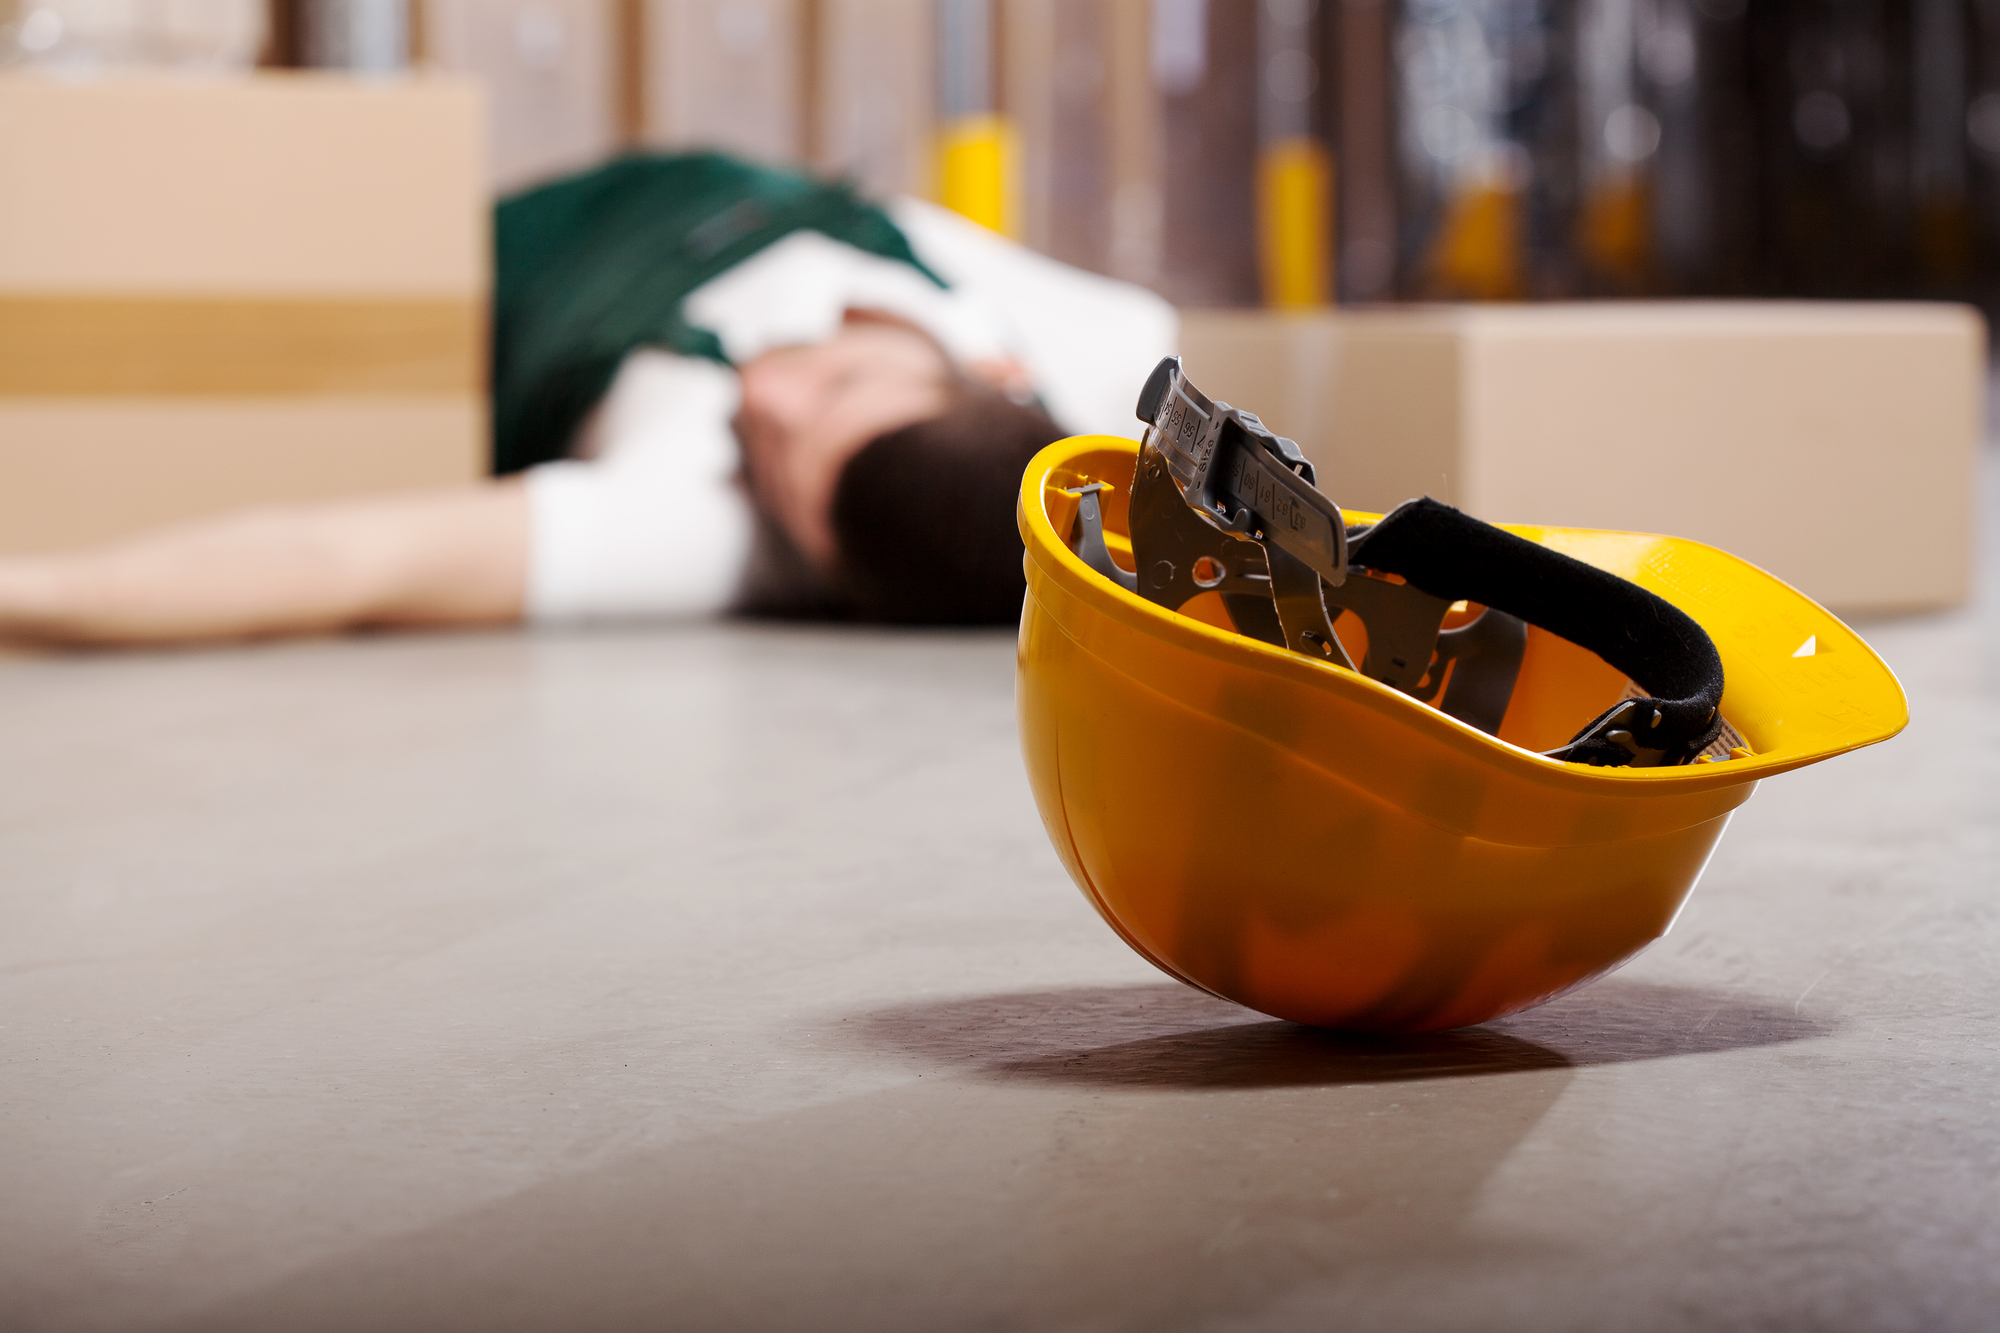 Worker's compensation mistakes you should avoid if injured at work